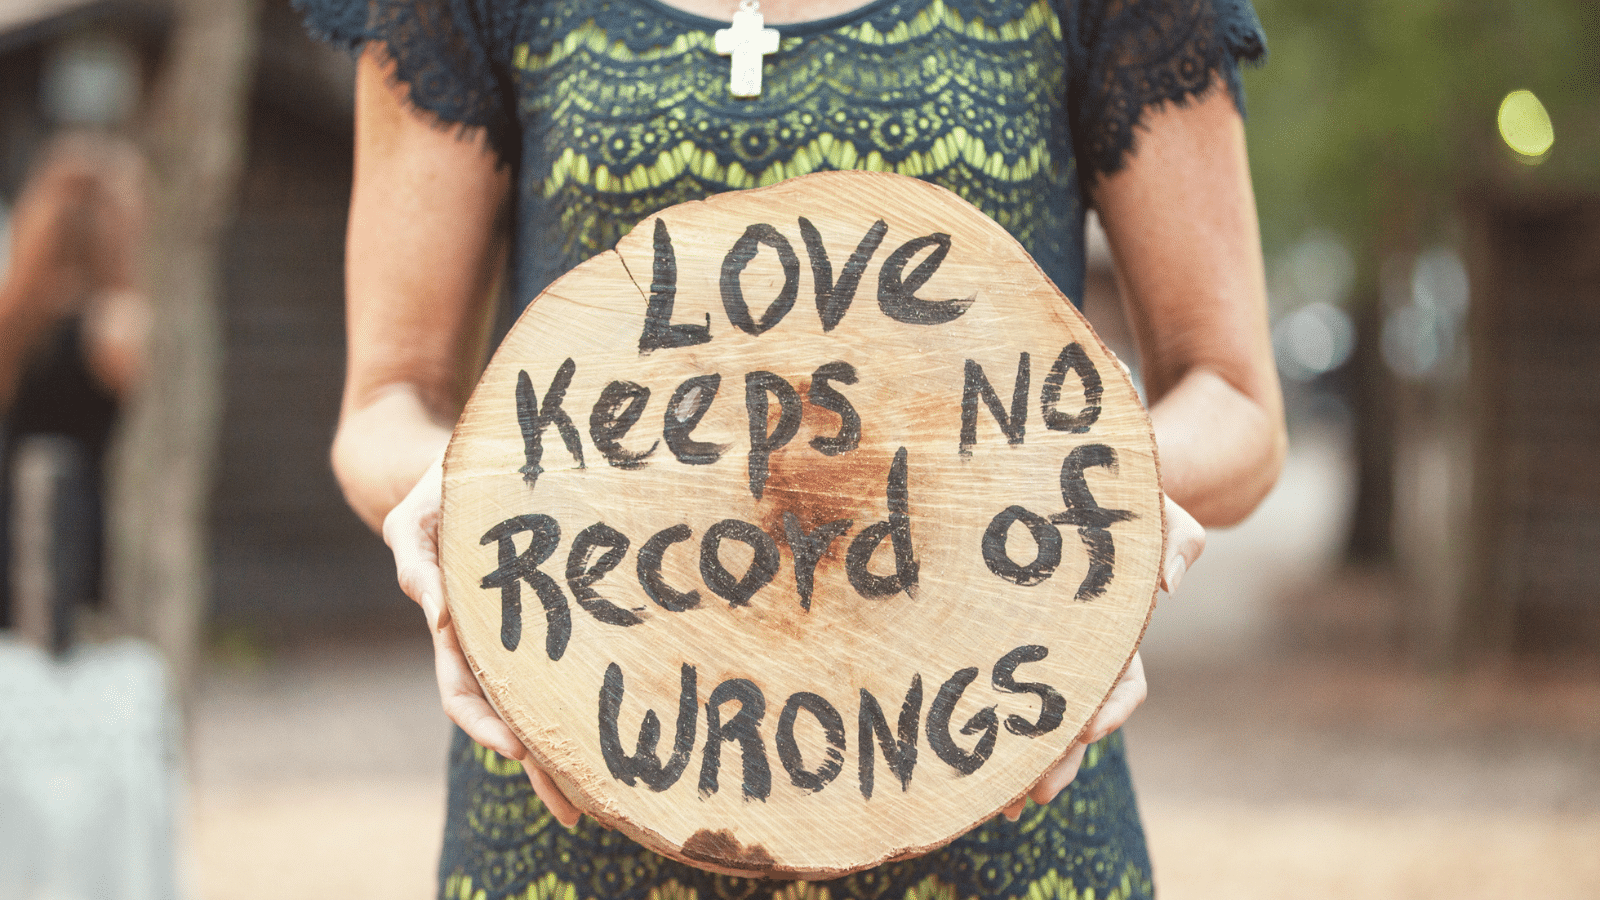 A woman wearing a green dress with a cross necklace, holding a round piece of wood that says, "love keeps no record of wrongs."